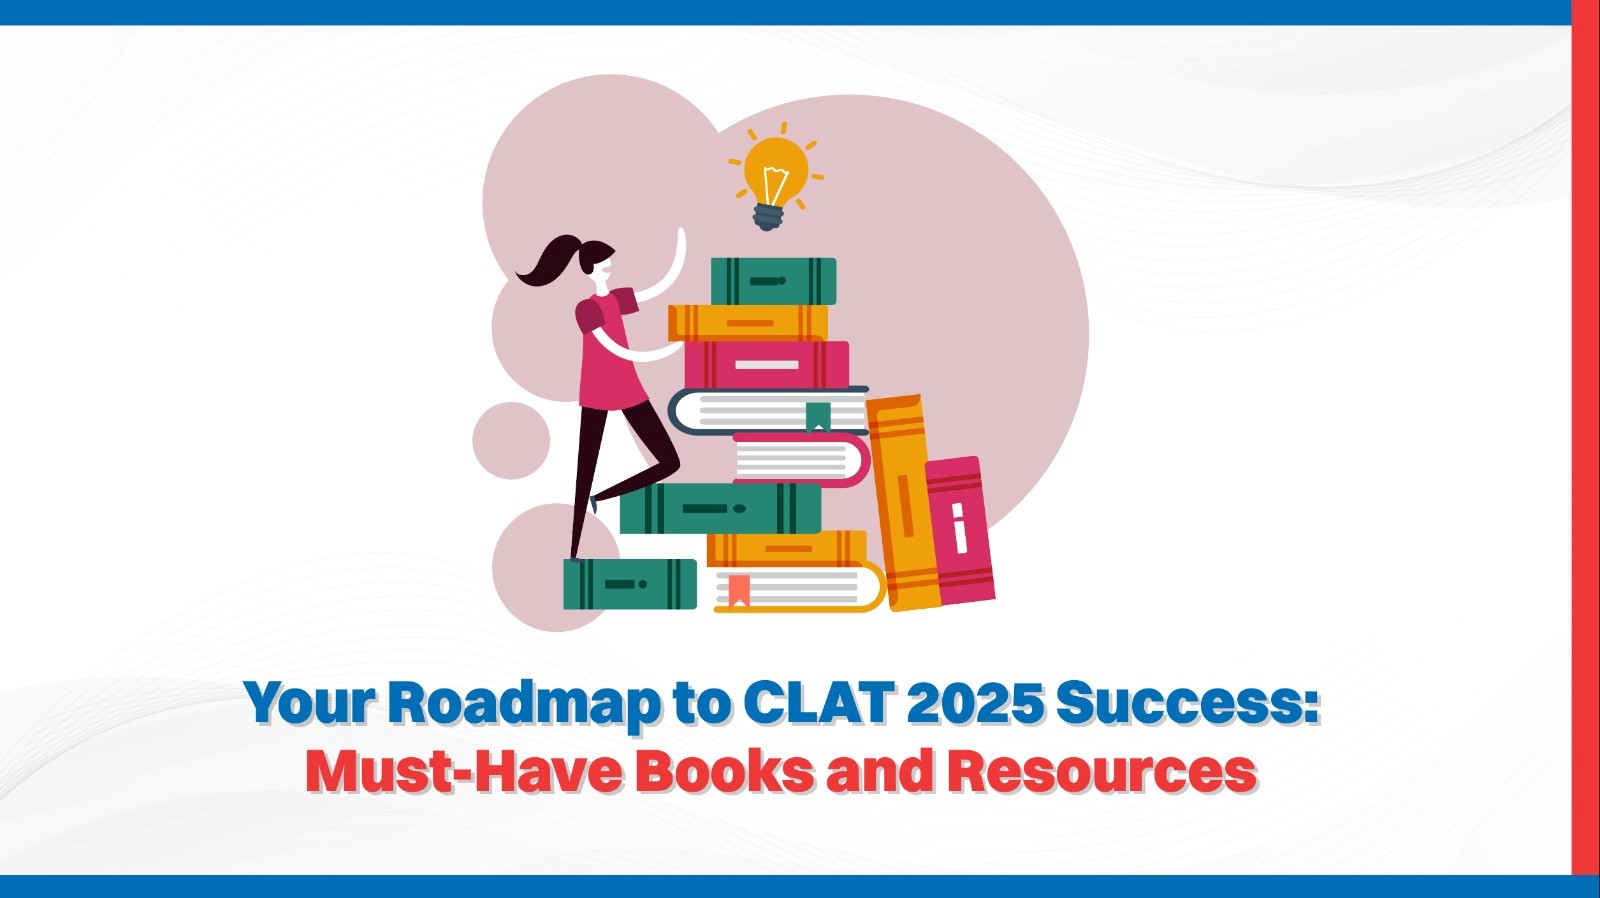 Your Roadmap to CLAT 2025 Success Must-Have Books and Resources.jpg